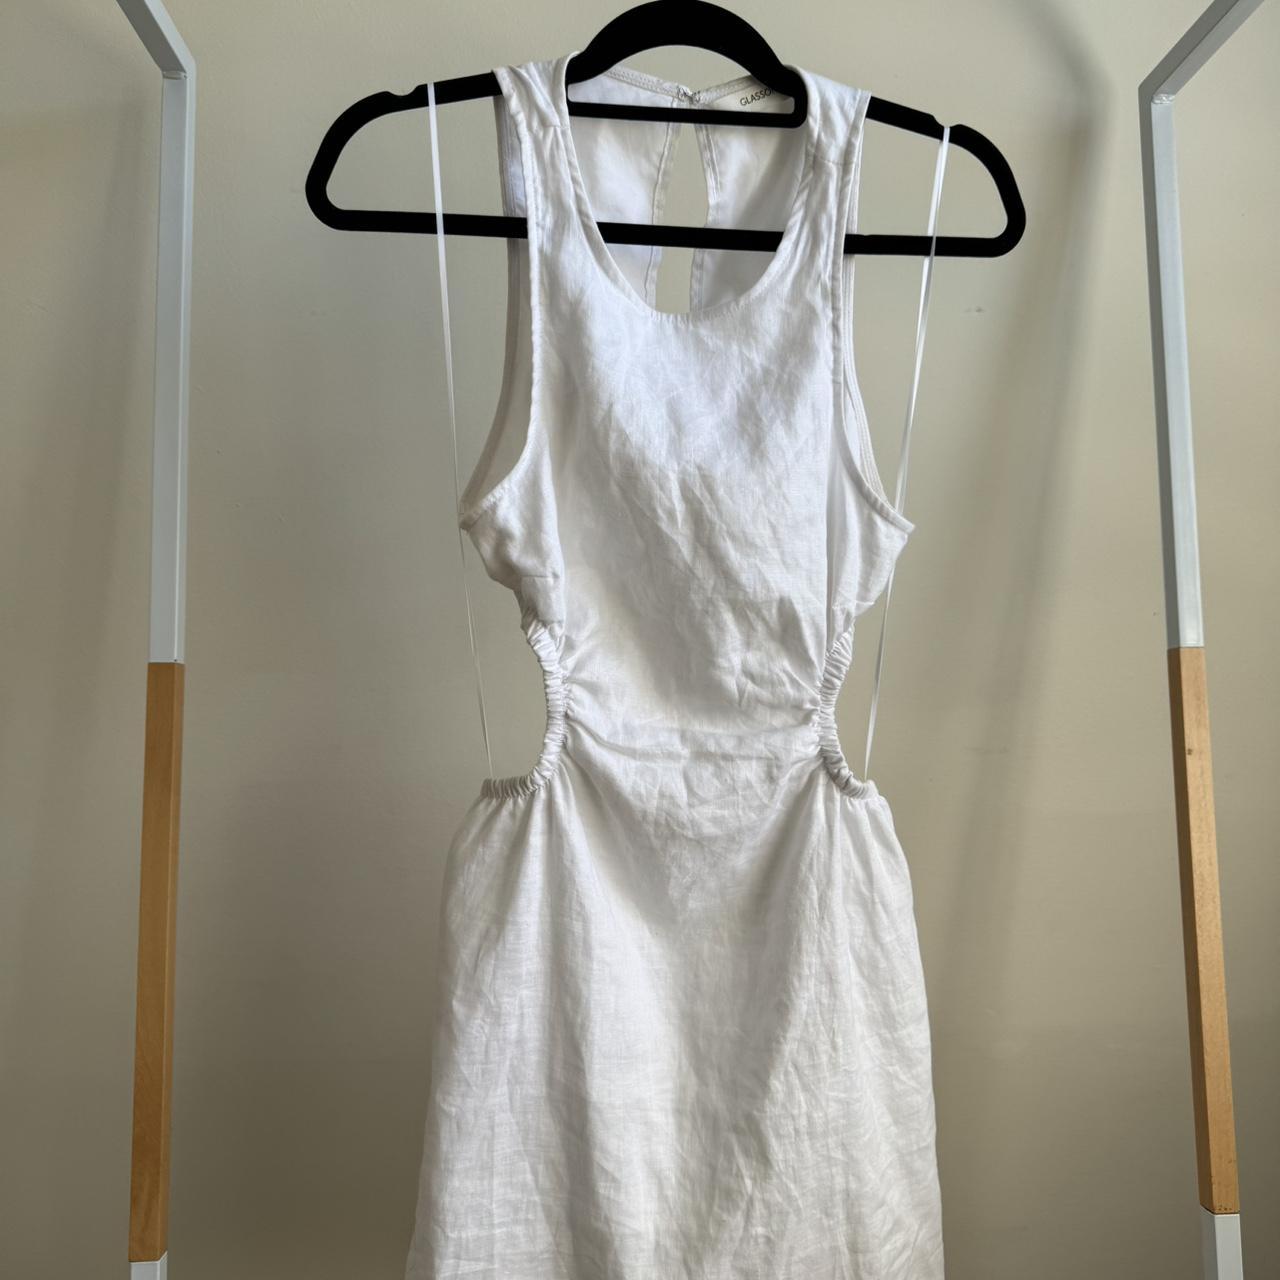 Glassons White Linen Mini Dress Size 6 Only been... - Depop